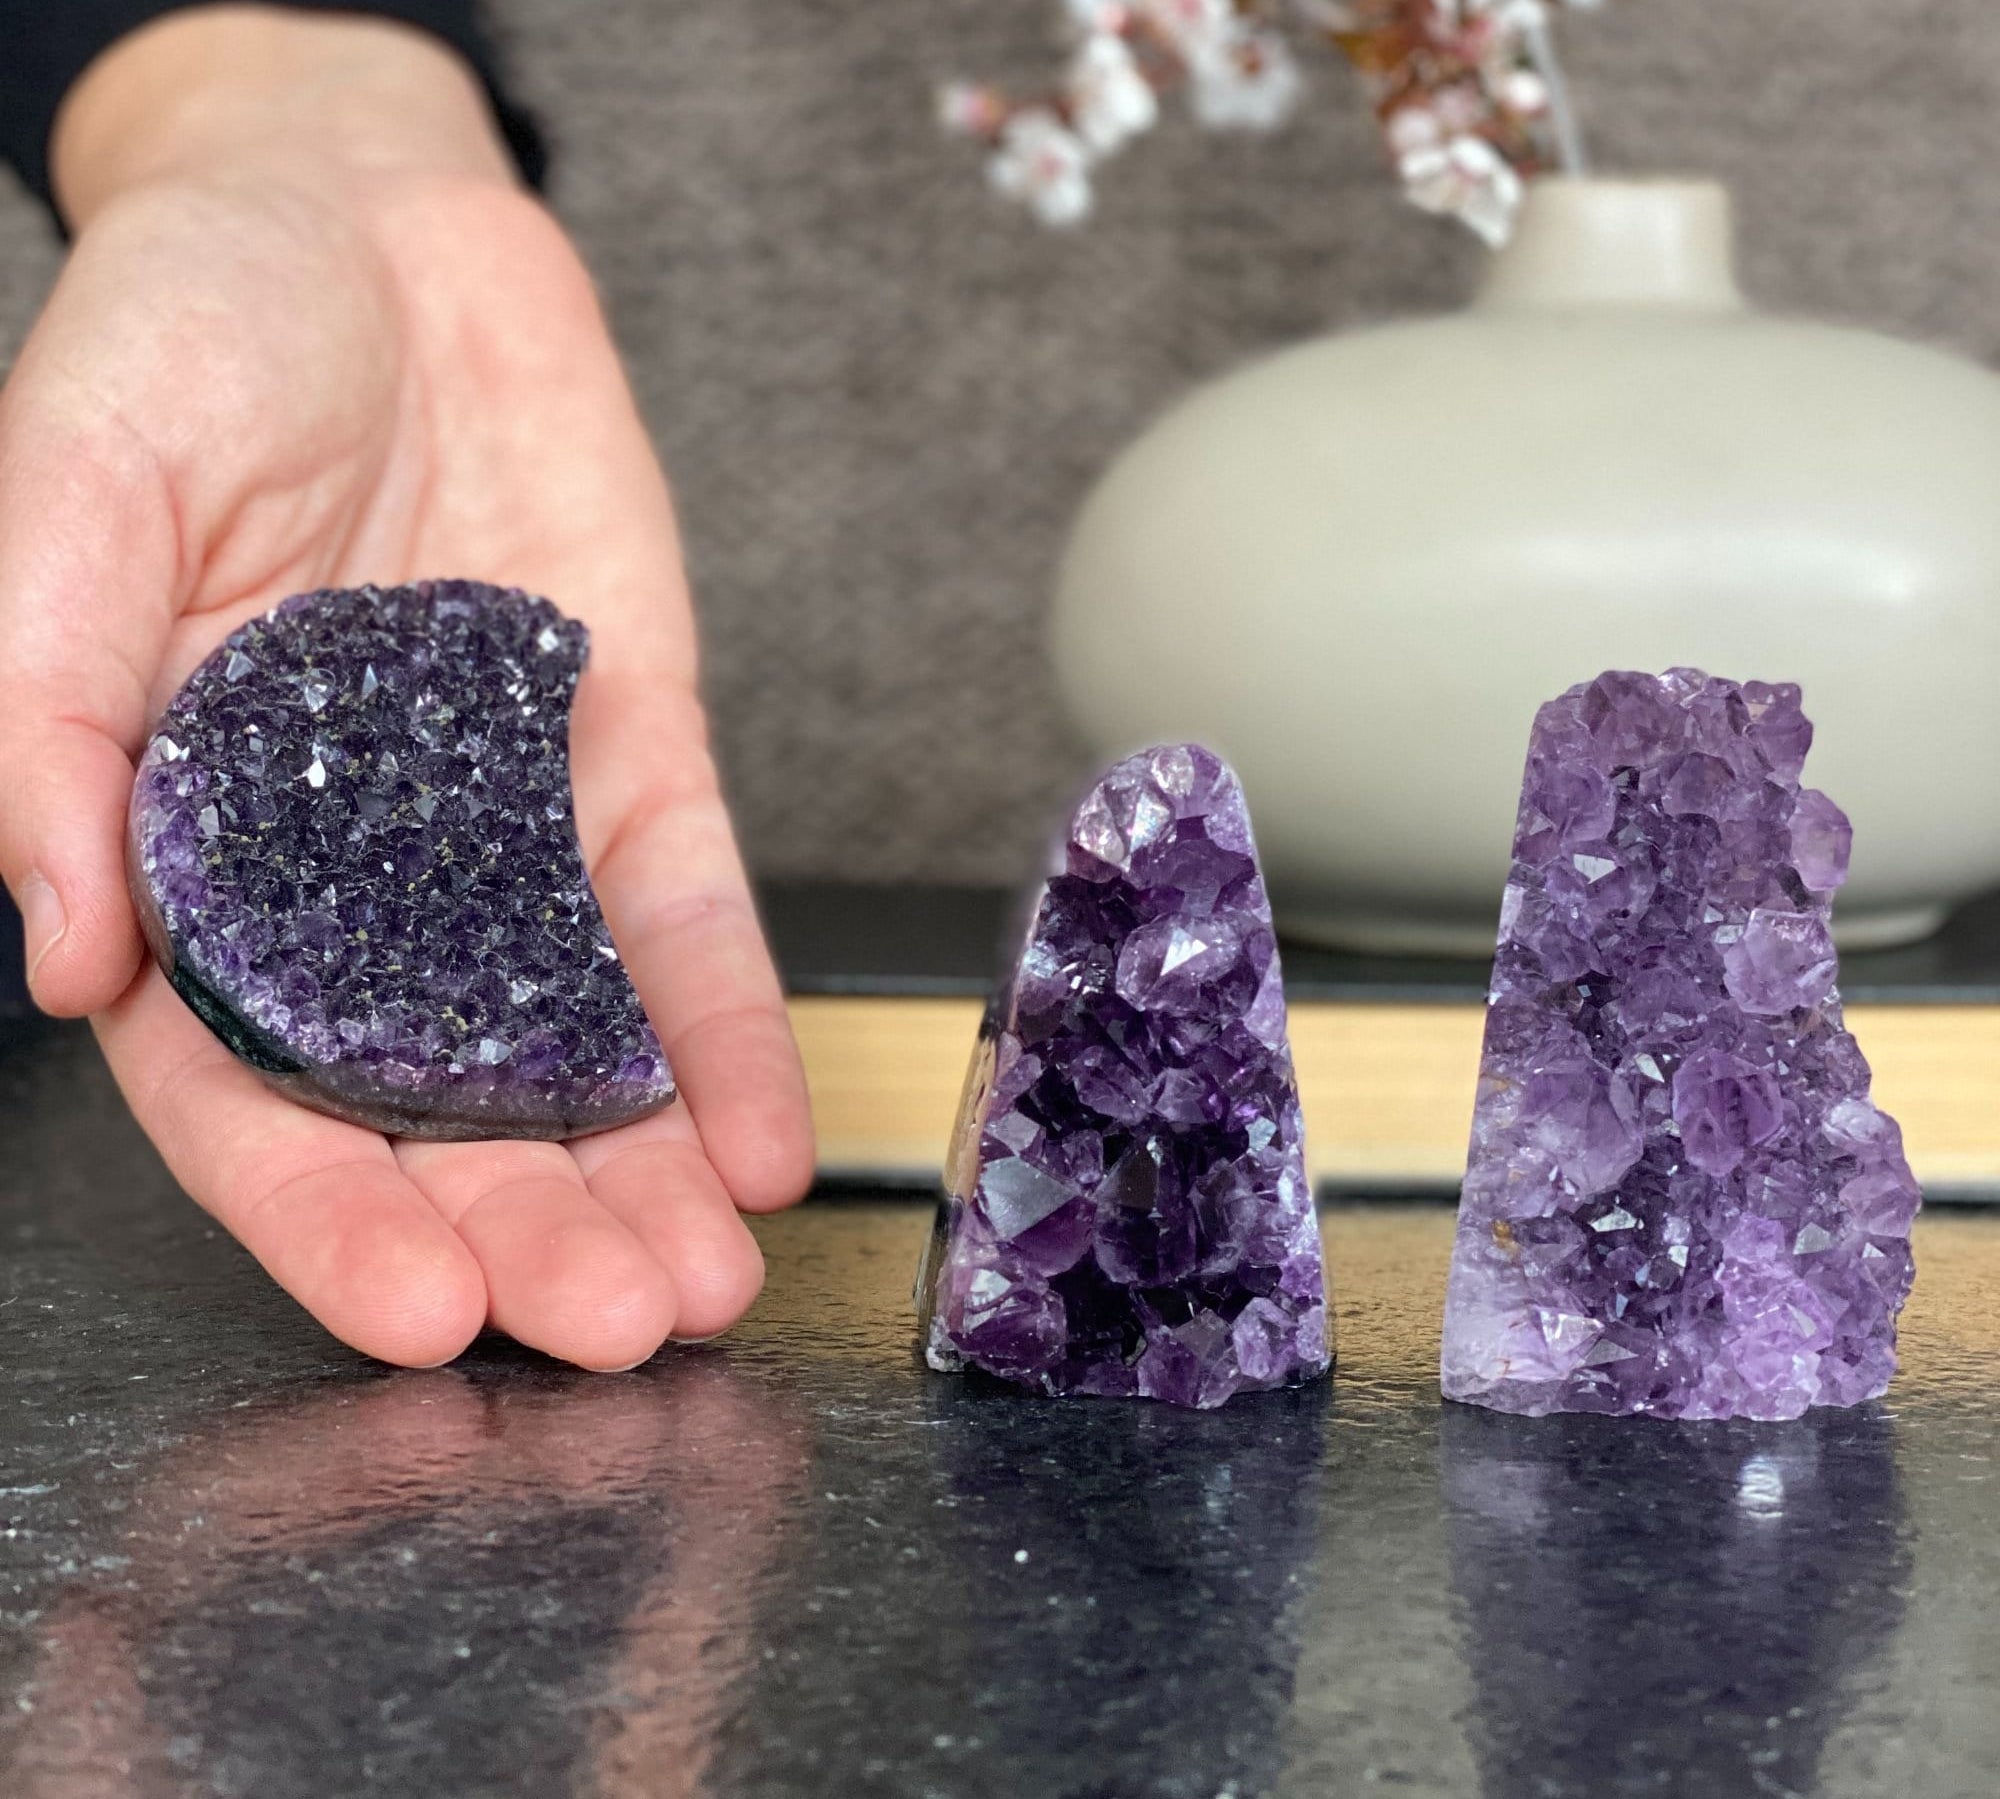 Deep Purple amethyst set (3 pieces), amethysts geodes and Moon, healing crystals